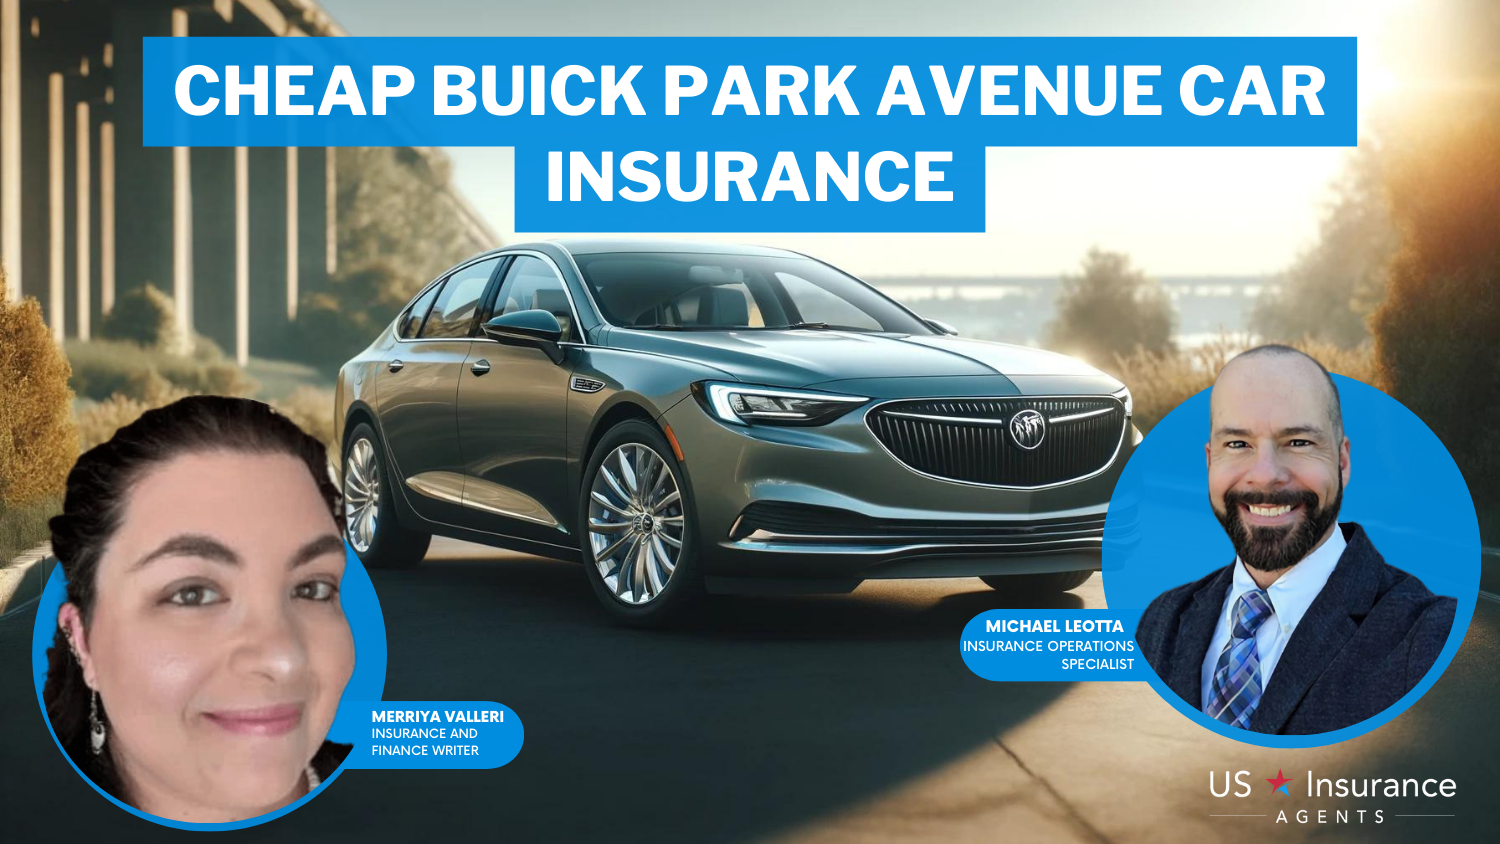 Cheap Buick Park Avenue Car Insurance: AAA, Metlife, and The Hartford